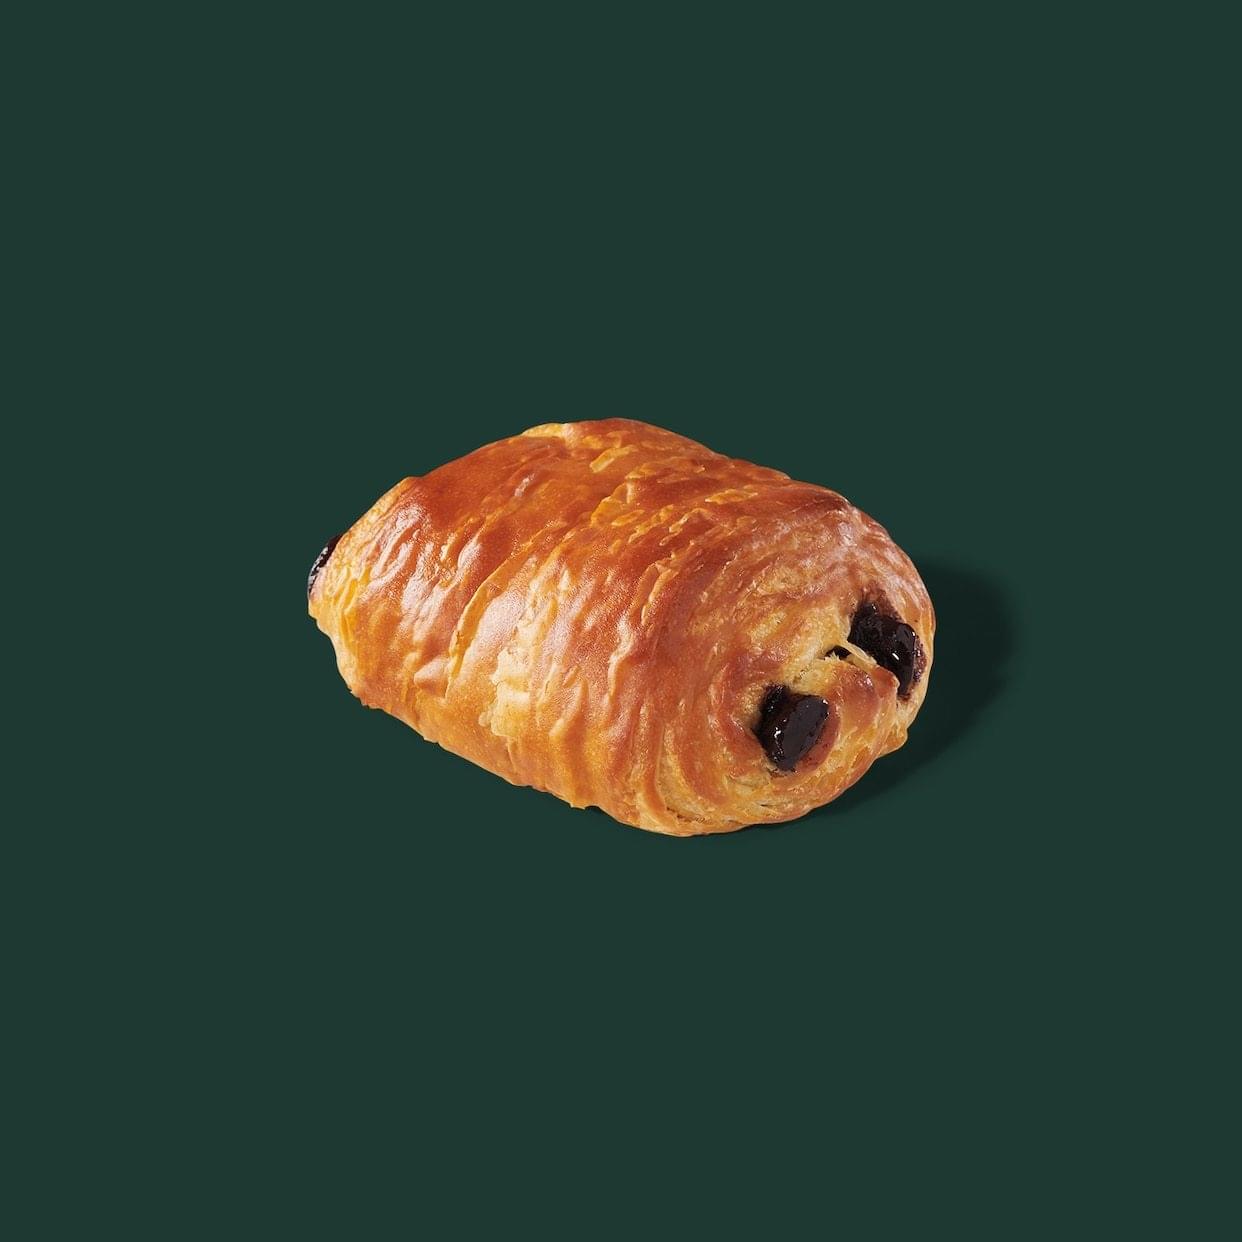 Starbucks Chocolate Croissant Nutrition Facts